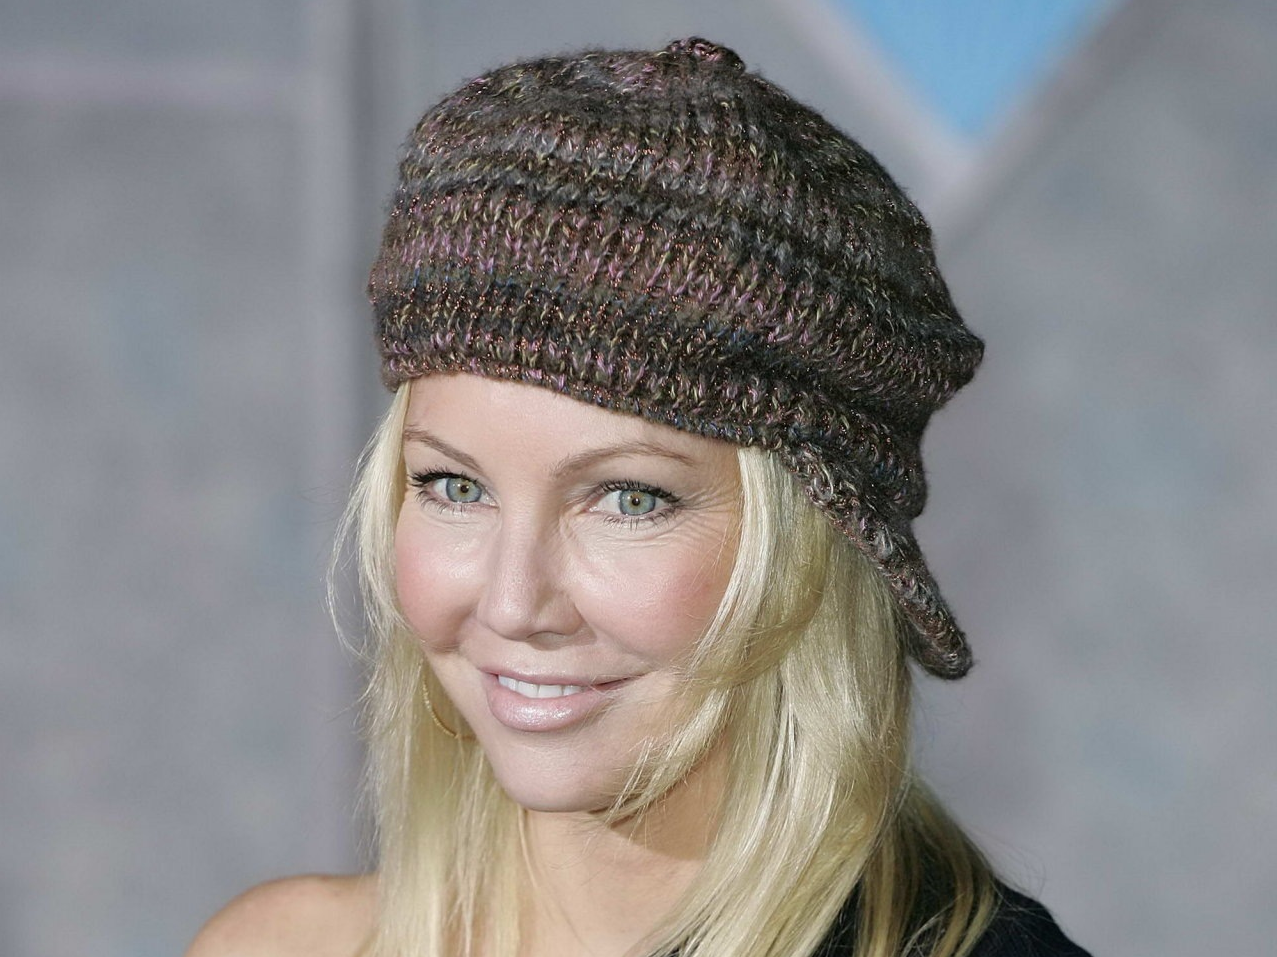 Heather locklear hot pictures